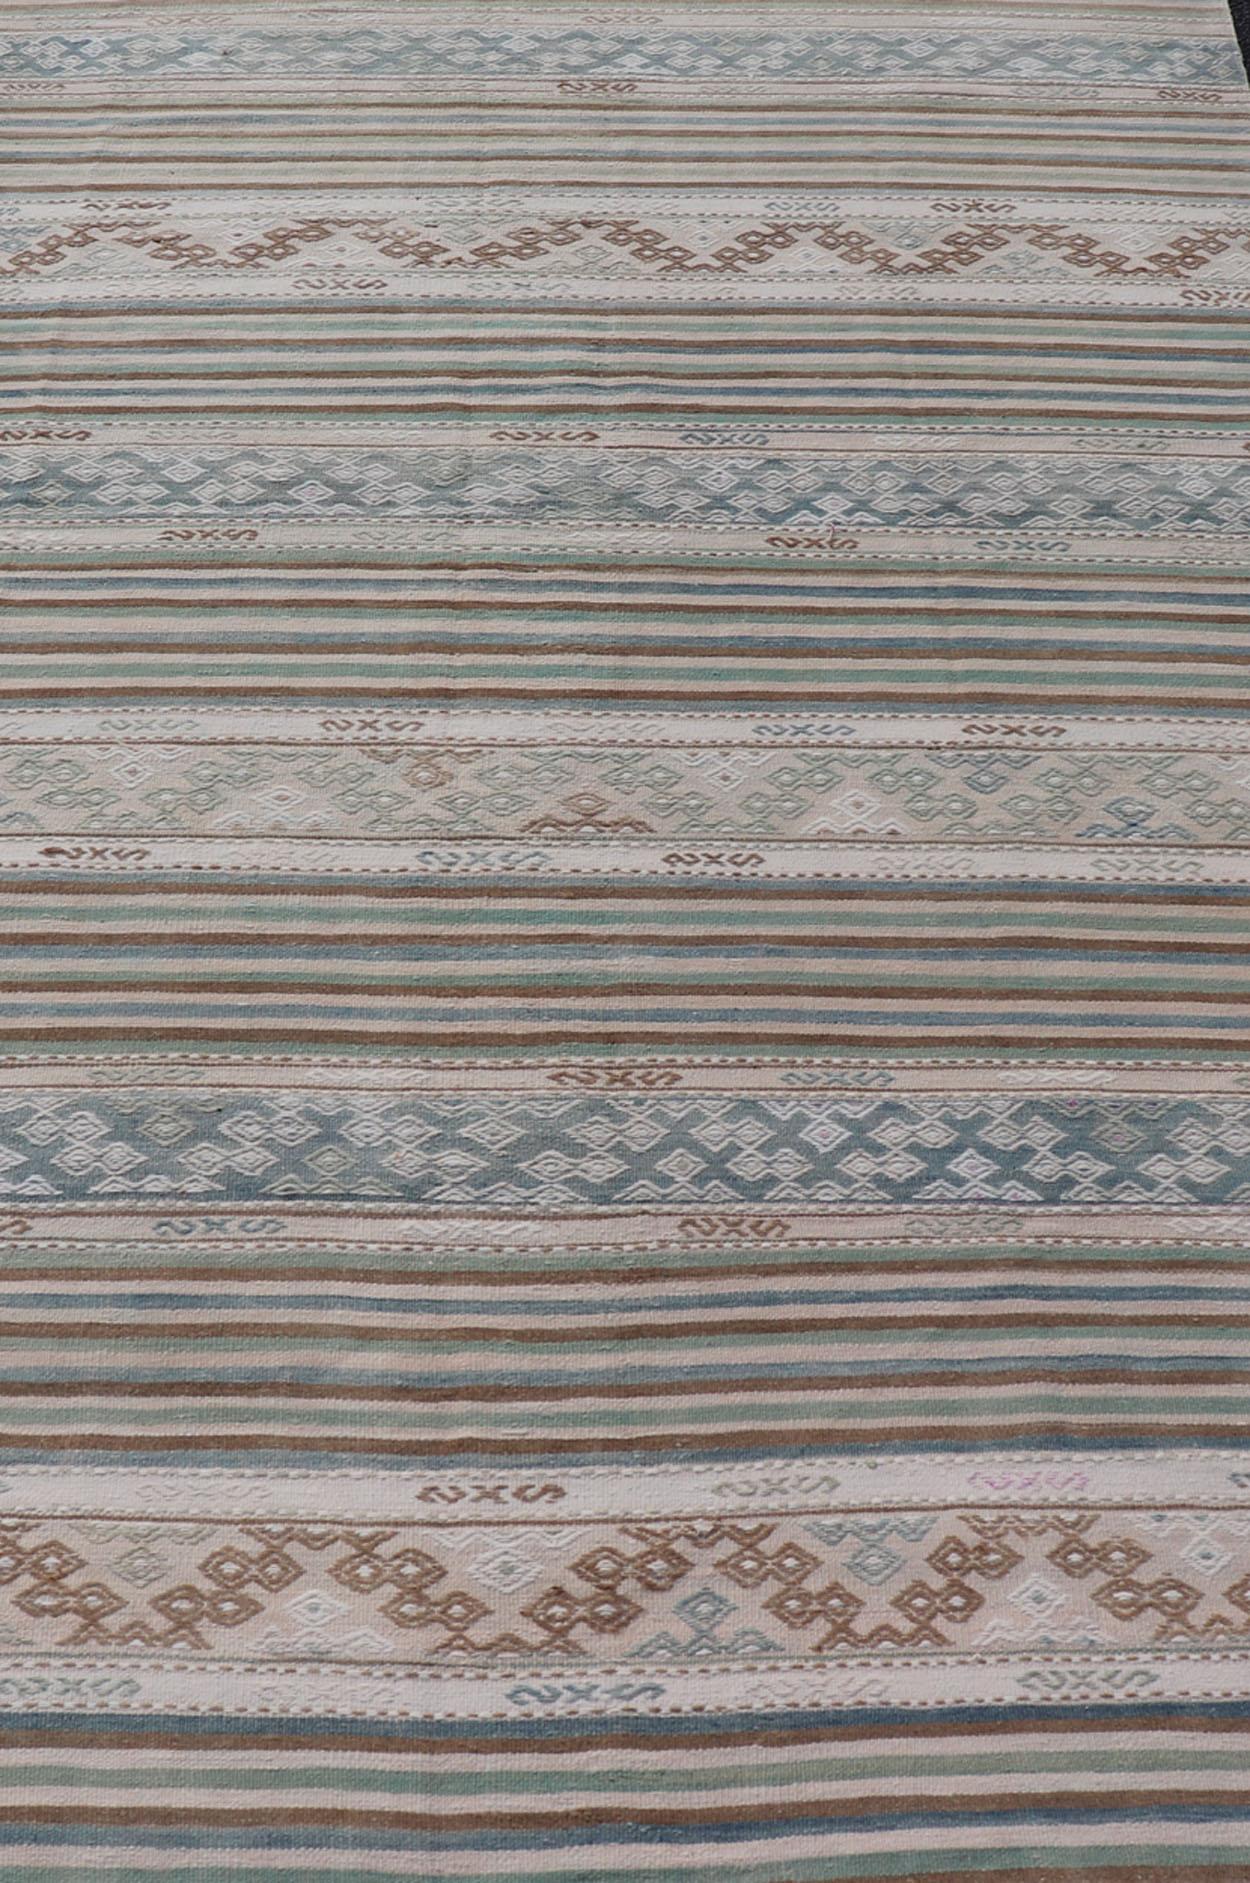 Turkish Flat-Weave Kilim with Stripes and Embroideries In Blue, Green, and Cream For Sale 2